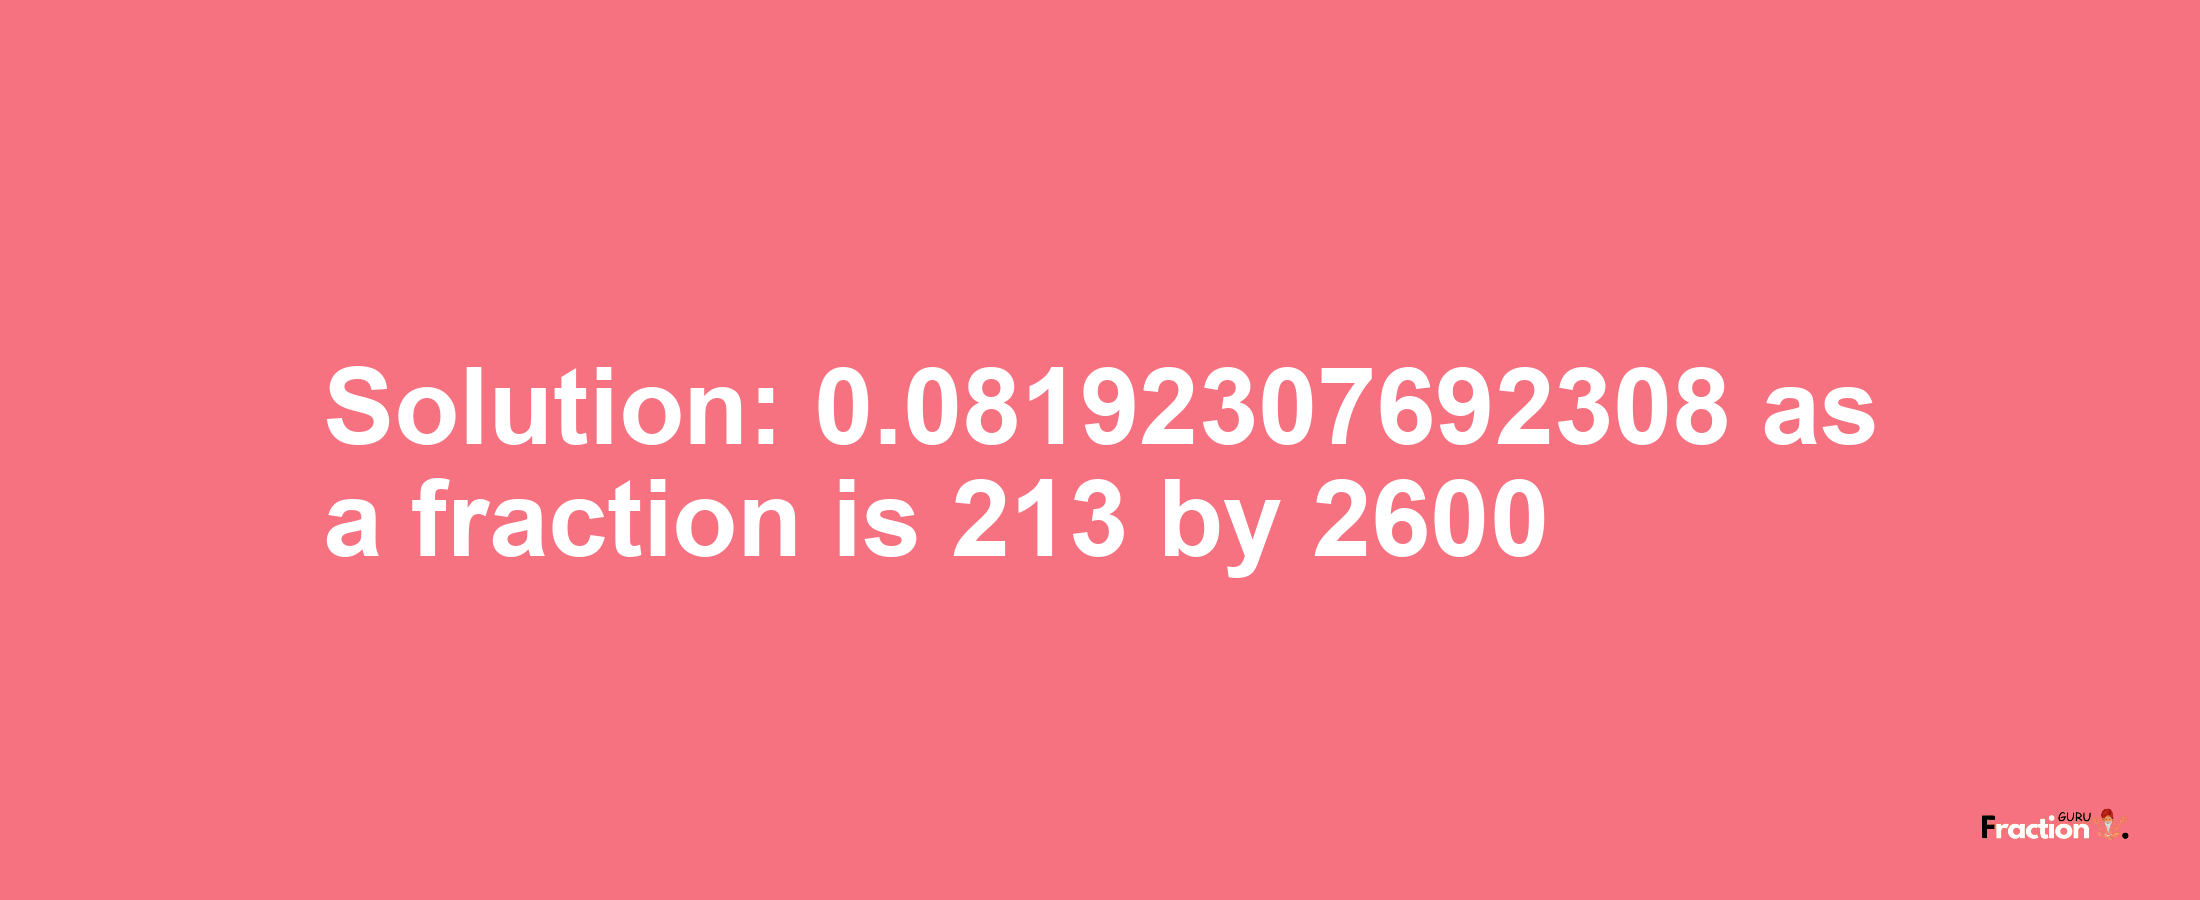 Solution:0.08192307692308 as a fraction is 213/2600